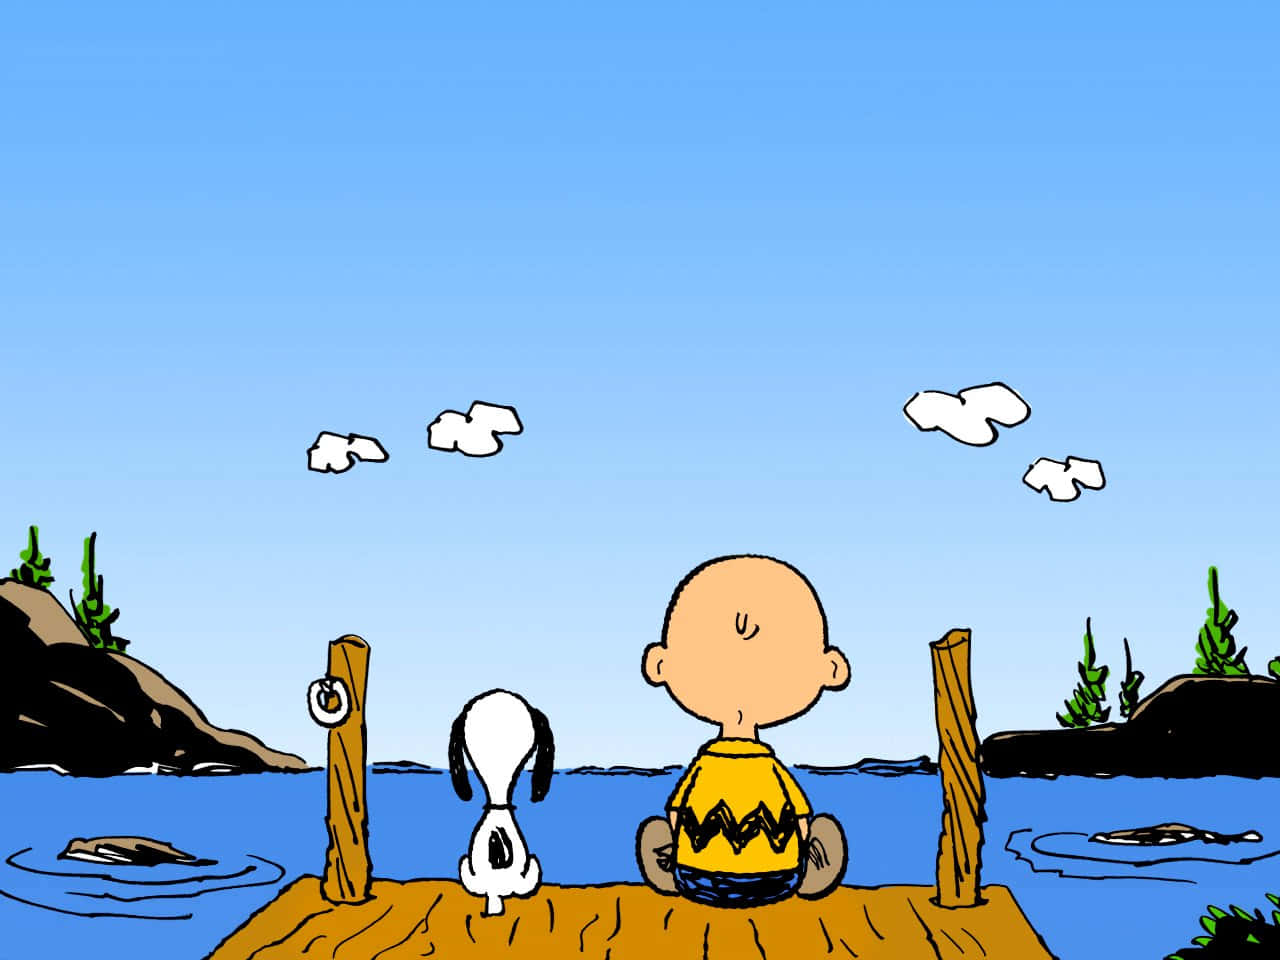 Snoopy is Ready for His Adventures!